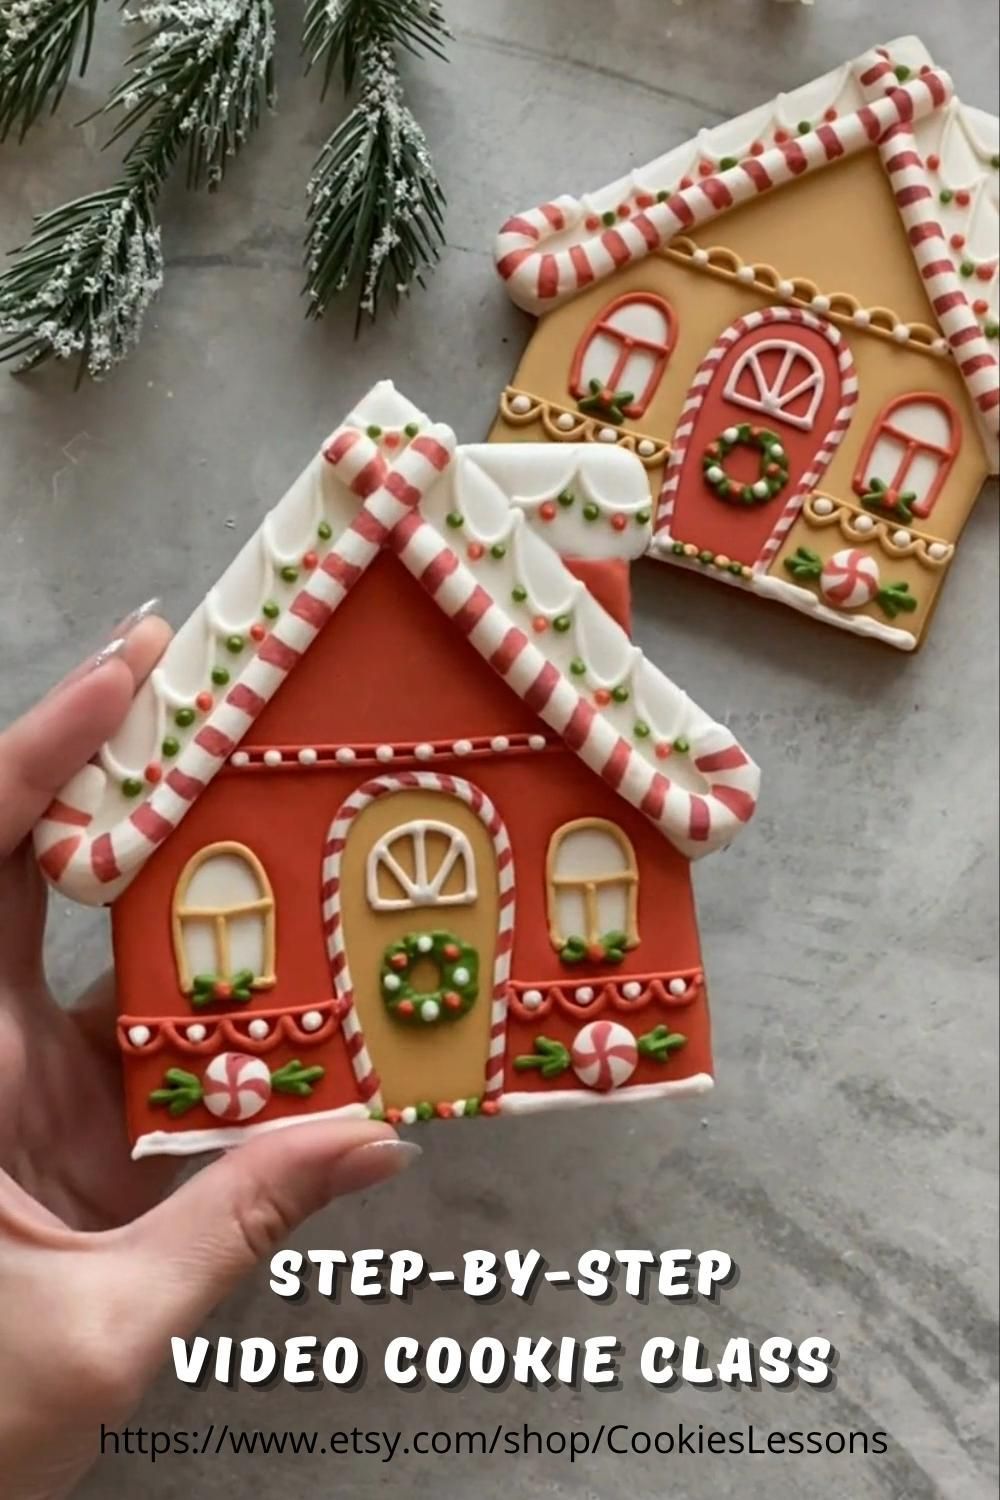 Christmas cookies - Houses - Christmas cookies - Houses -   18 ginger bread house decorations christmas gingerbread ideas